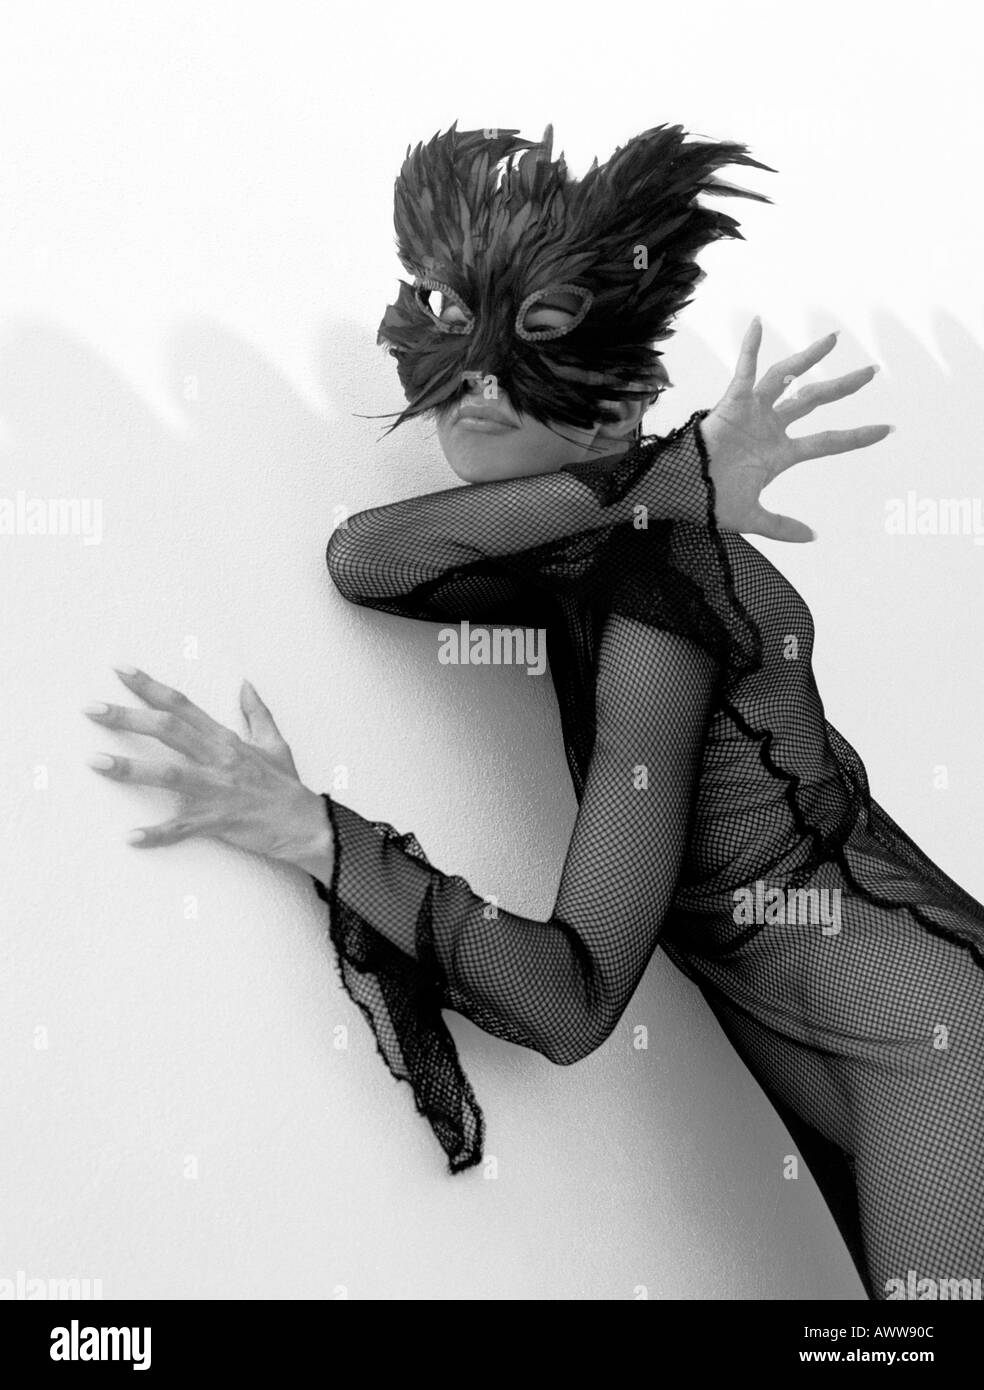 Monochrome Image of a Girl in a Black Net Dress and Black Feather Mask Stock Photo